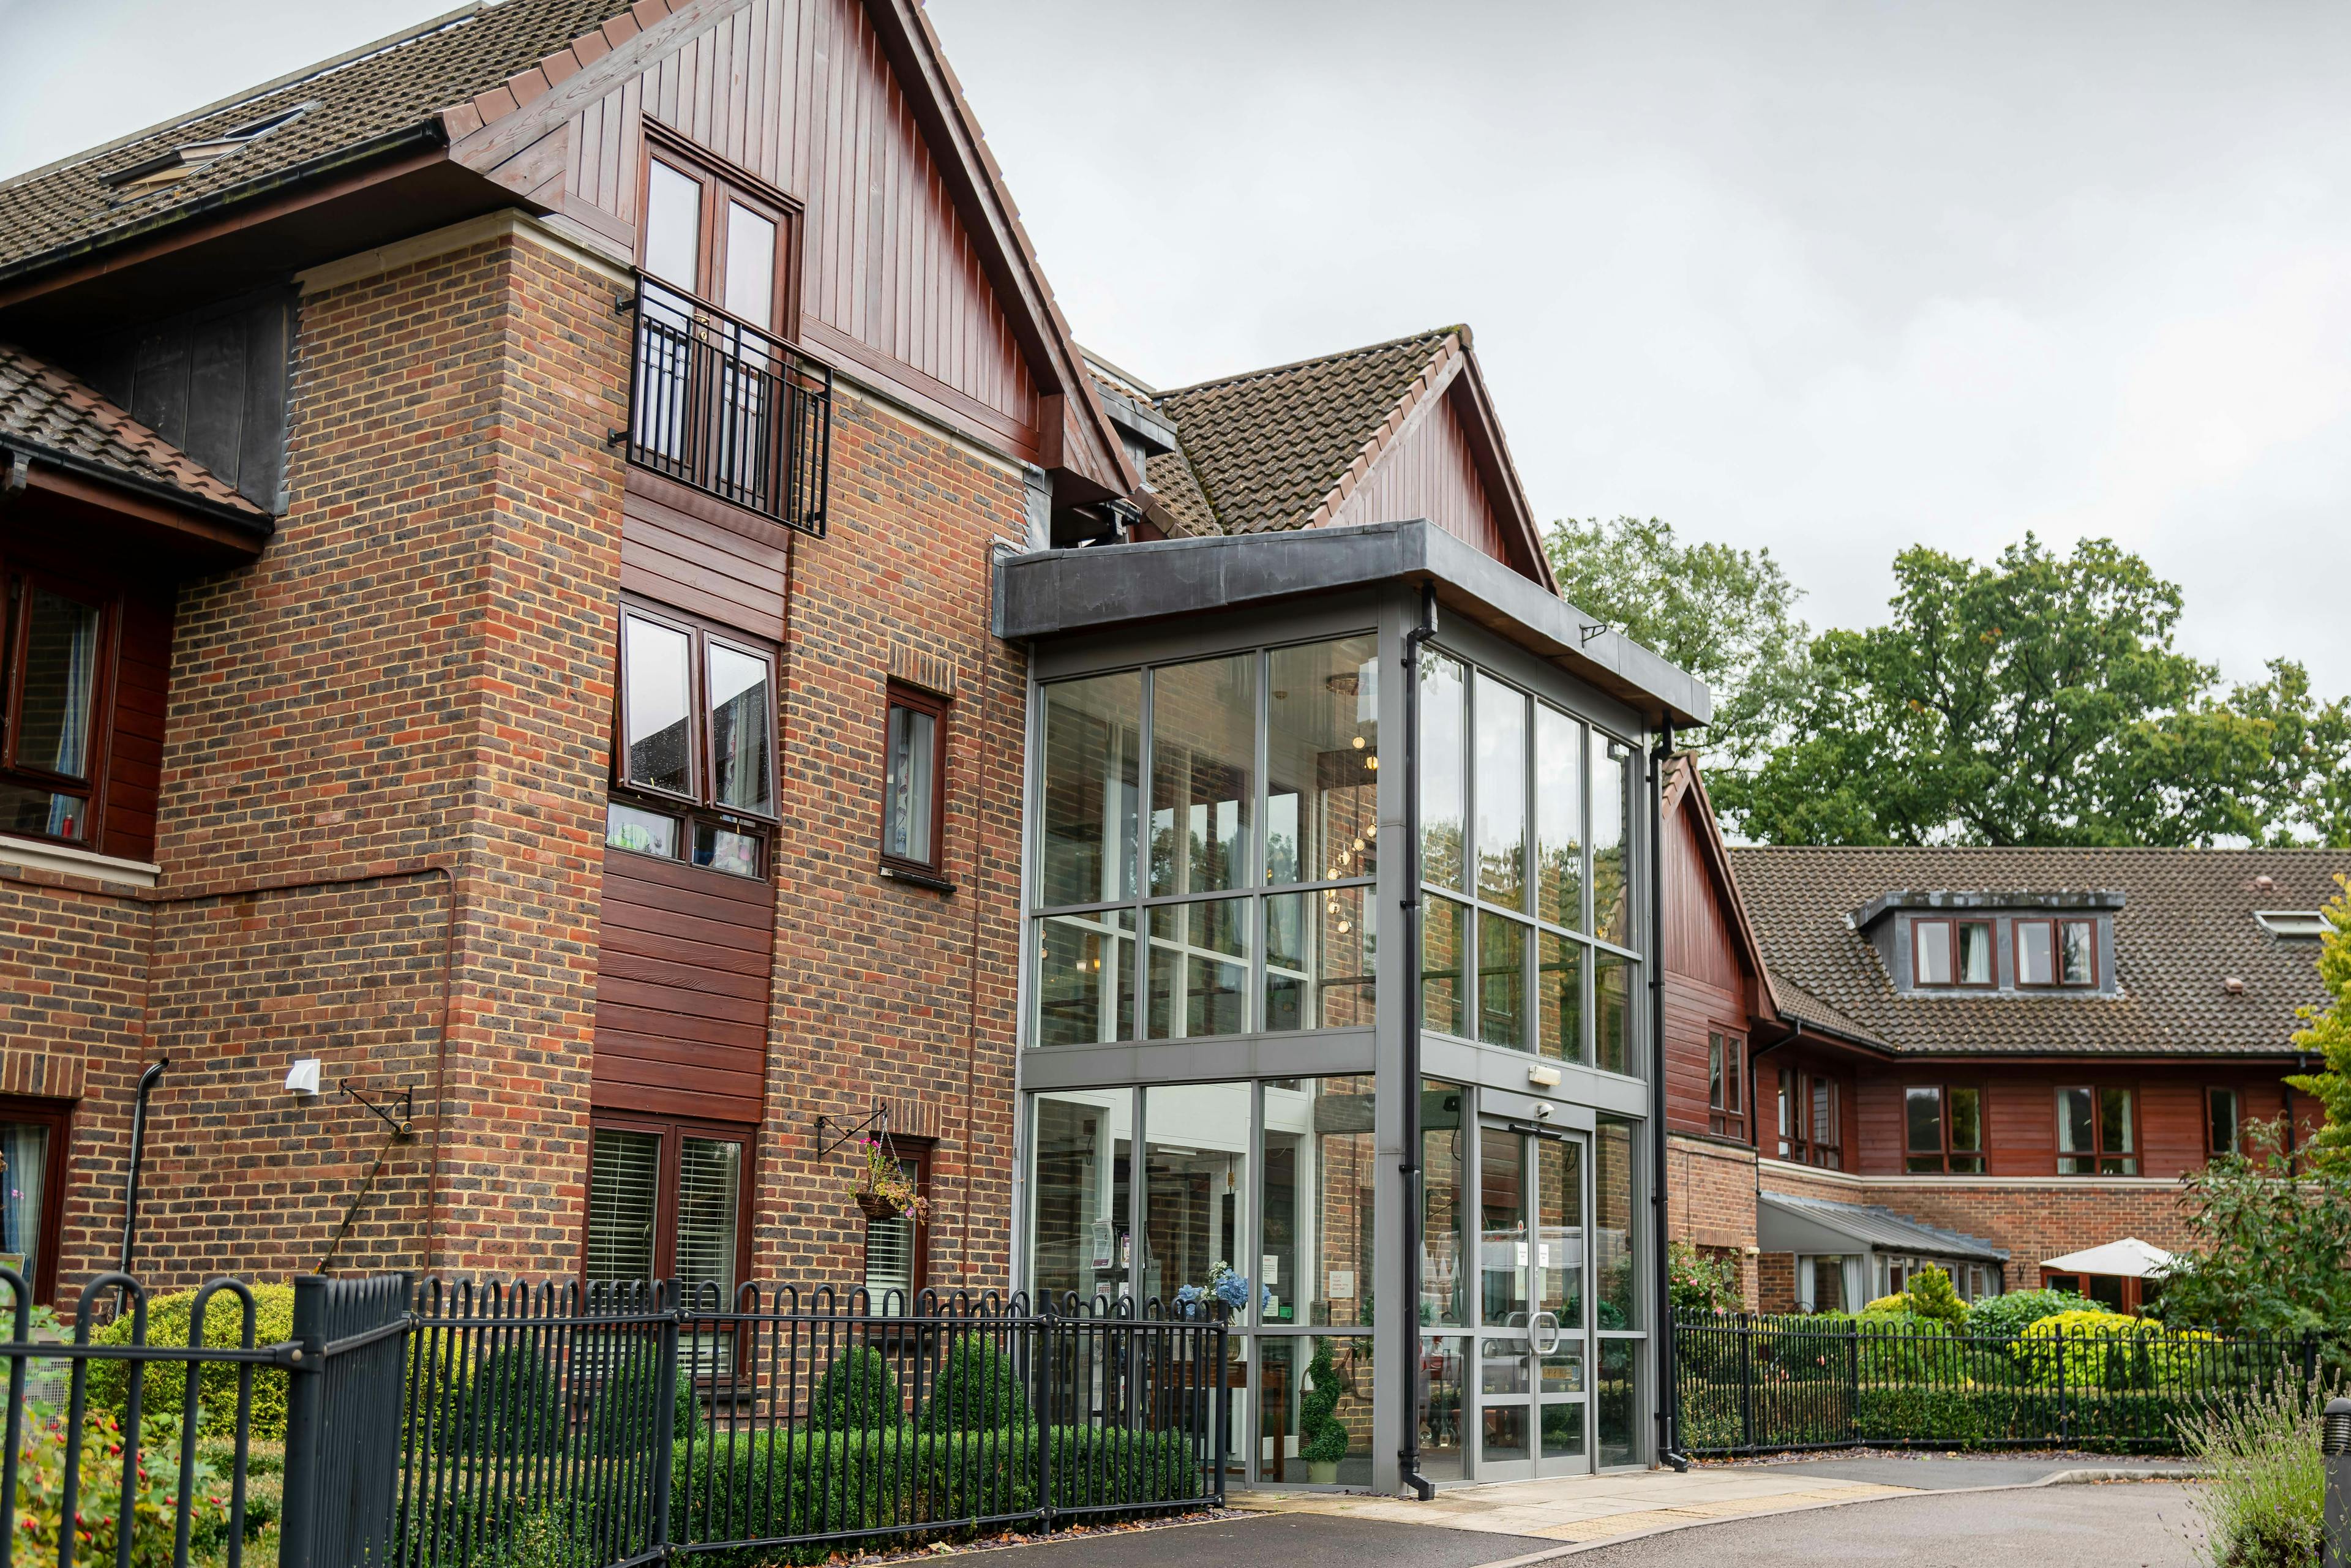 Exterior of Tandridge Heights Care Home in Oxted, Surrey